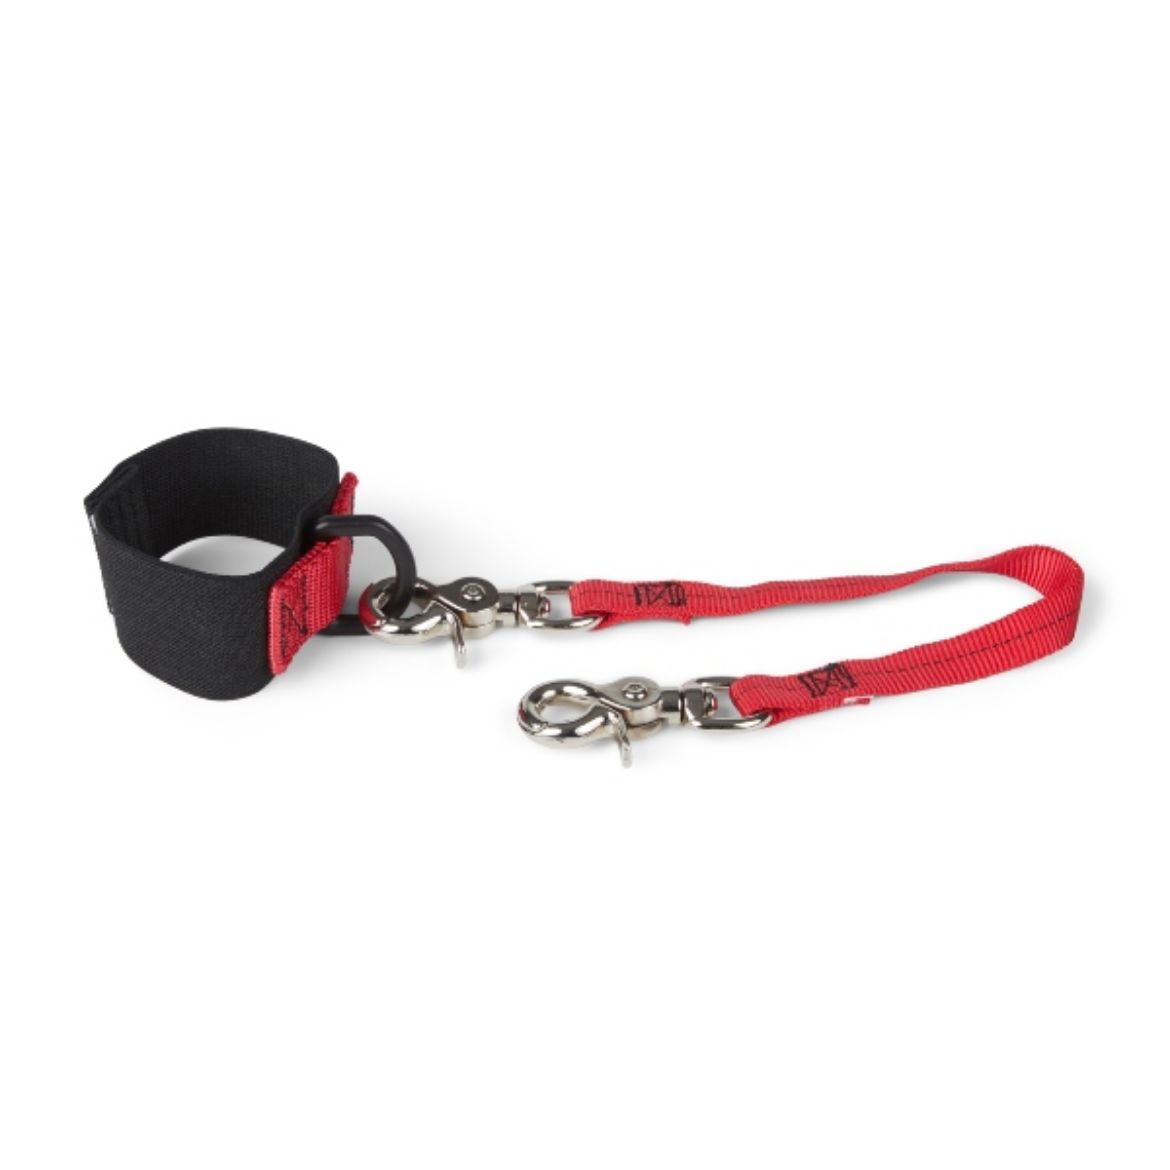 Picture of SLIP-ON WRIST ANCHOR WITH TOOL TETHER SIZE M